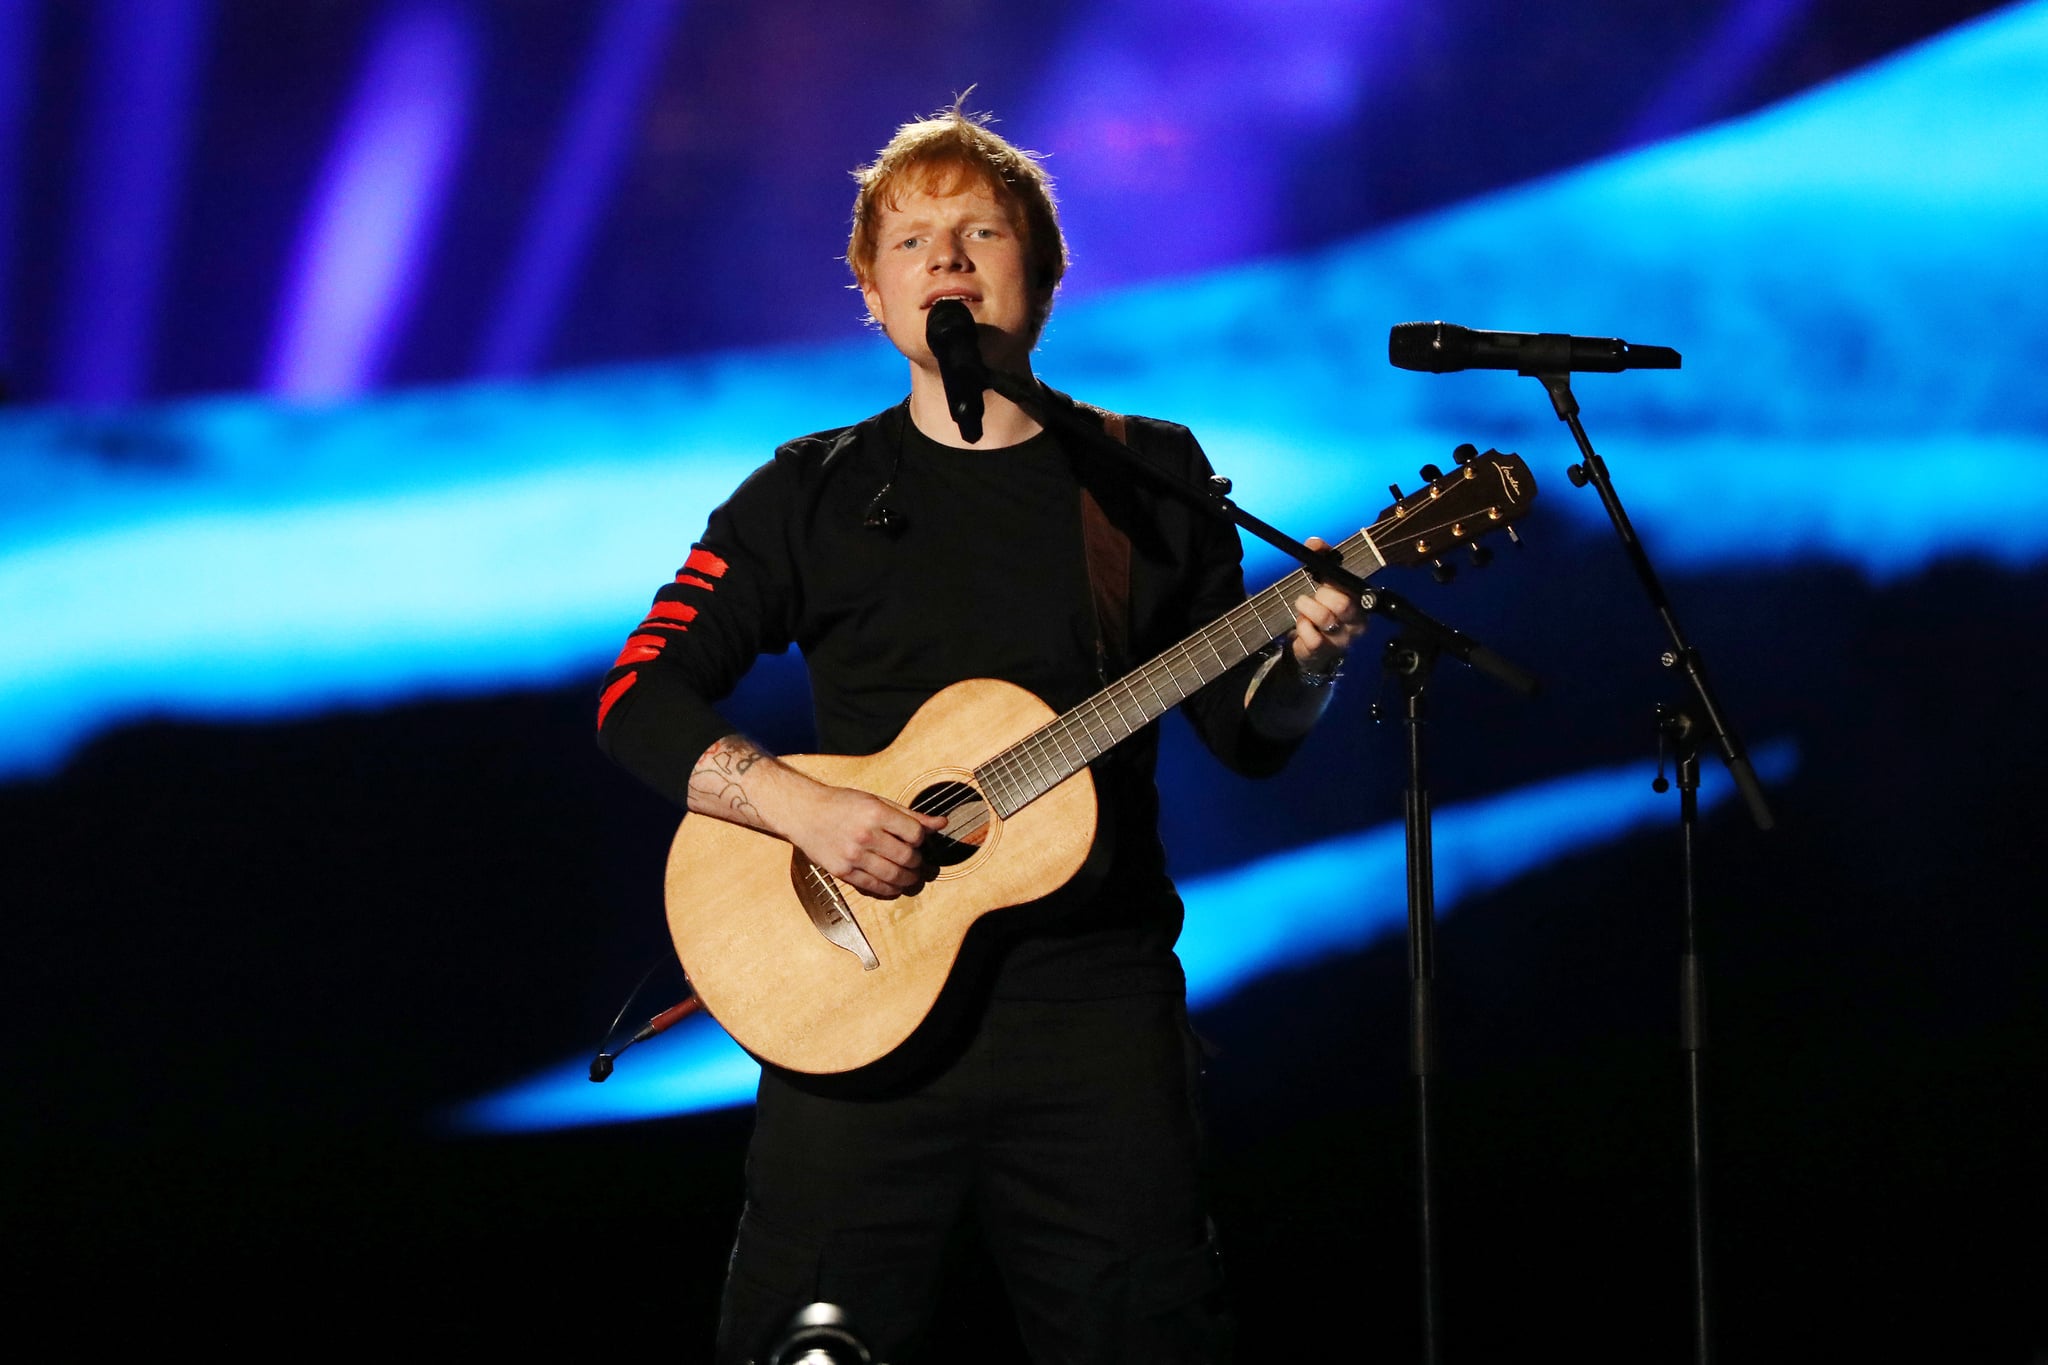 PARIS, FRANCE - SEPTEMBER 25: Ed Sheeran performs on stage during Global Citizen Live on September 25, 2021 in Paris, France. (Photo by Marc Piasecki/Getty Images For Global Citizen)